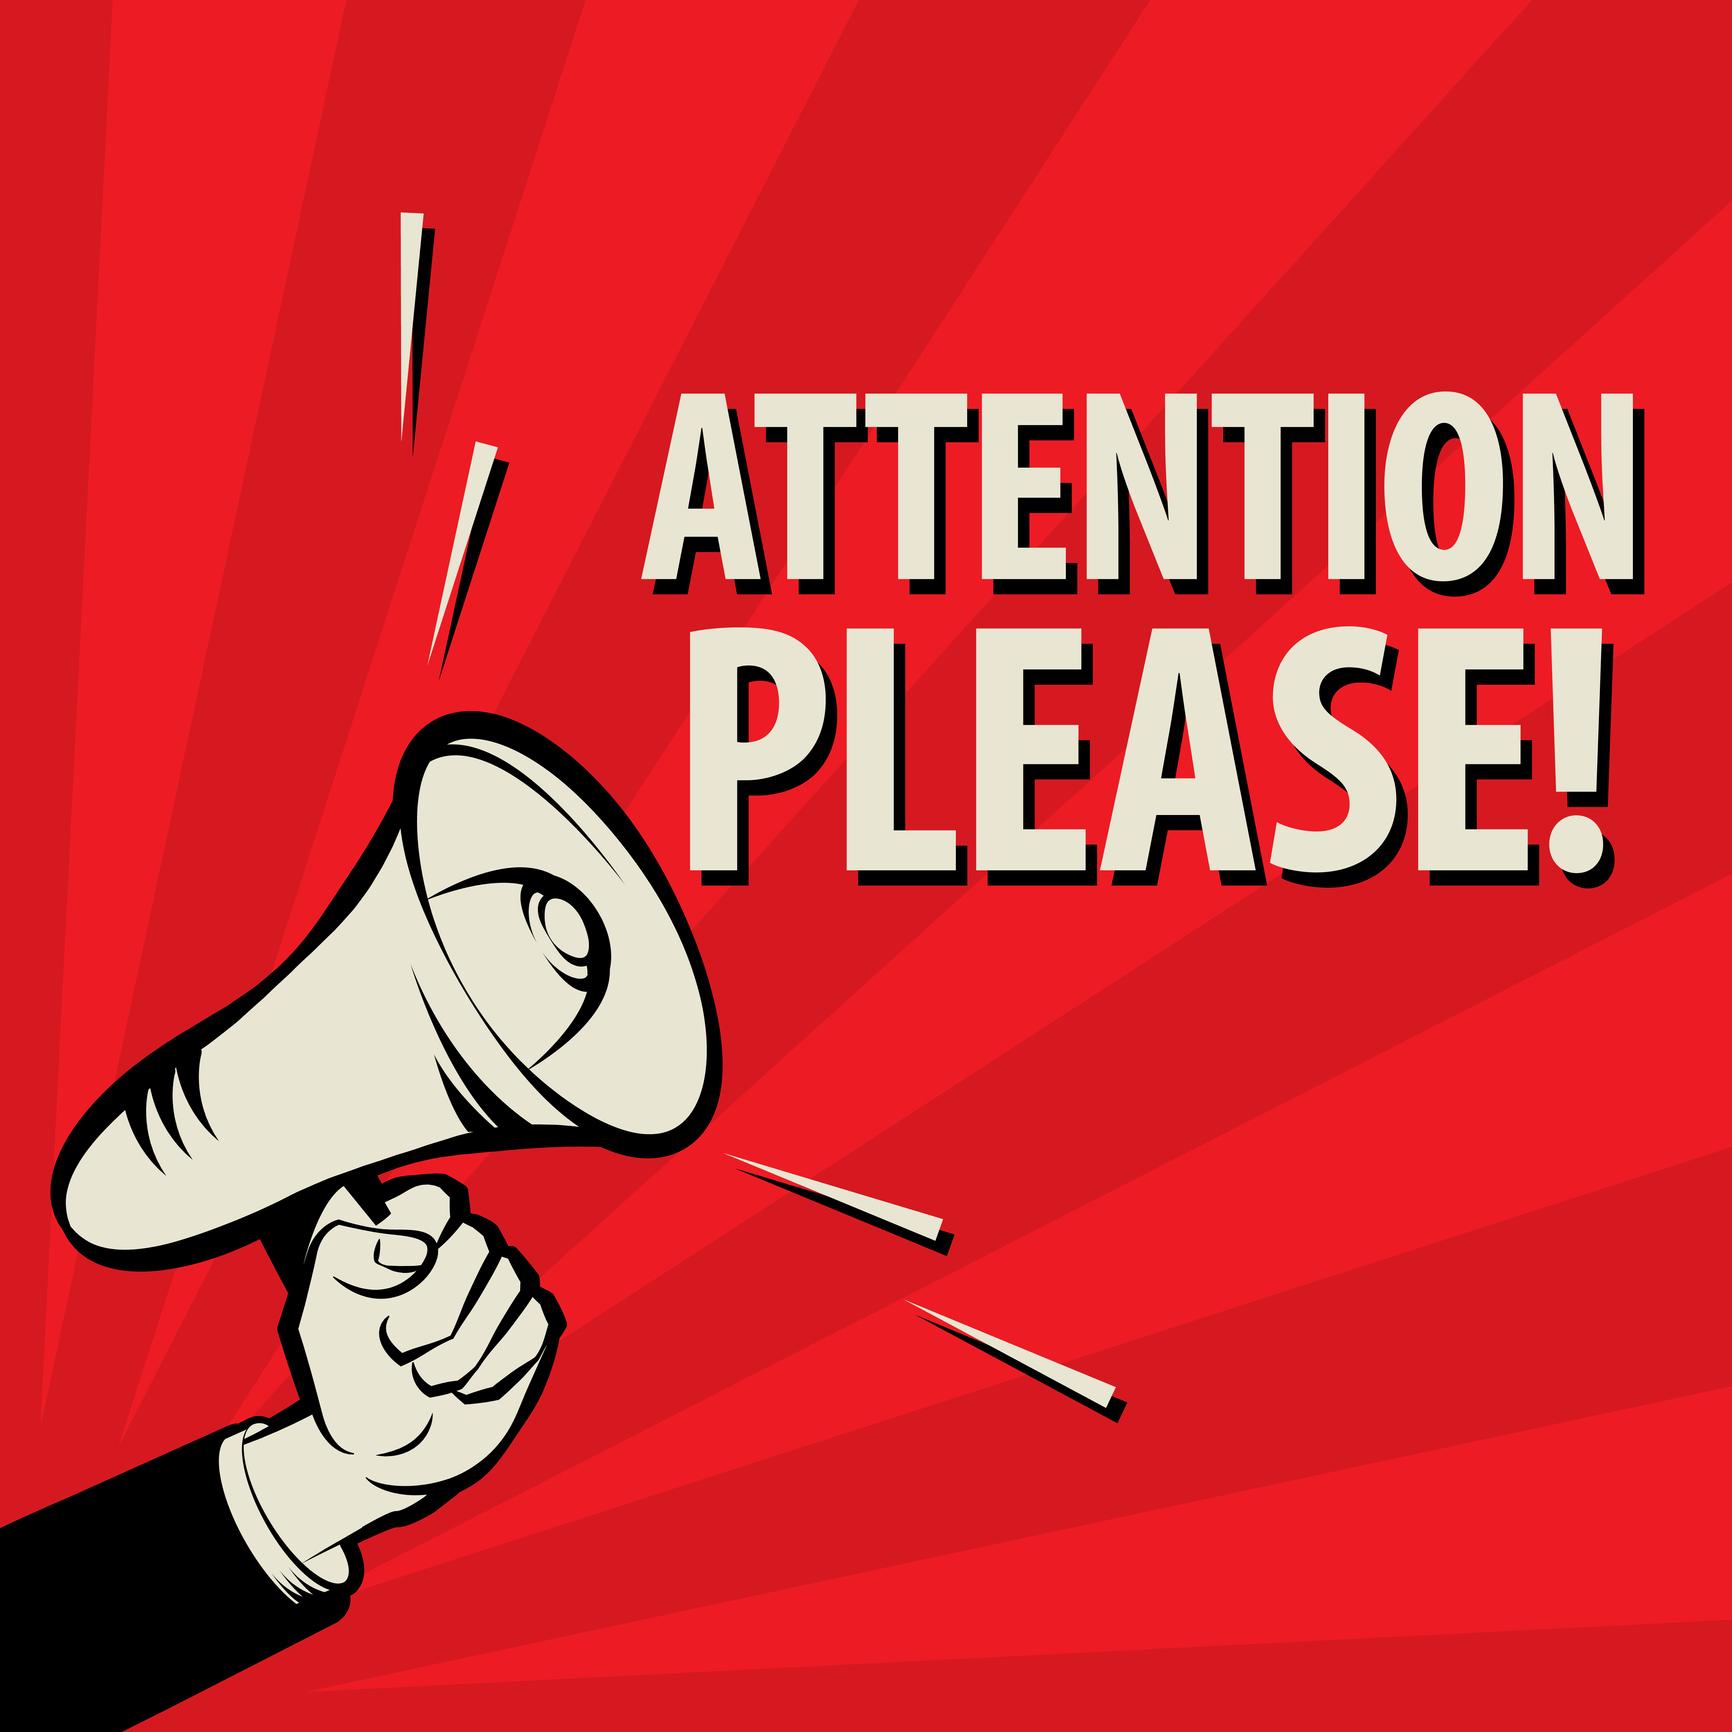 ATTENTION:  According to the Tennessee Department of Health, all incoming 7th graders are required to have proof of TDap immunization booster to attend school.  Please be sure to obtained updated immunization record from your physician/health department and provide to the school.  THANK YOU!